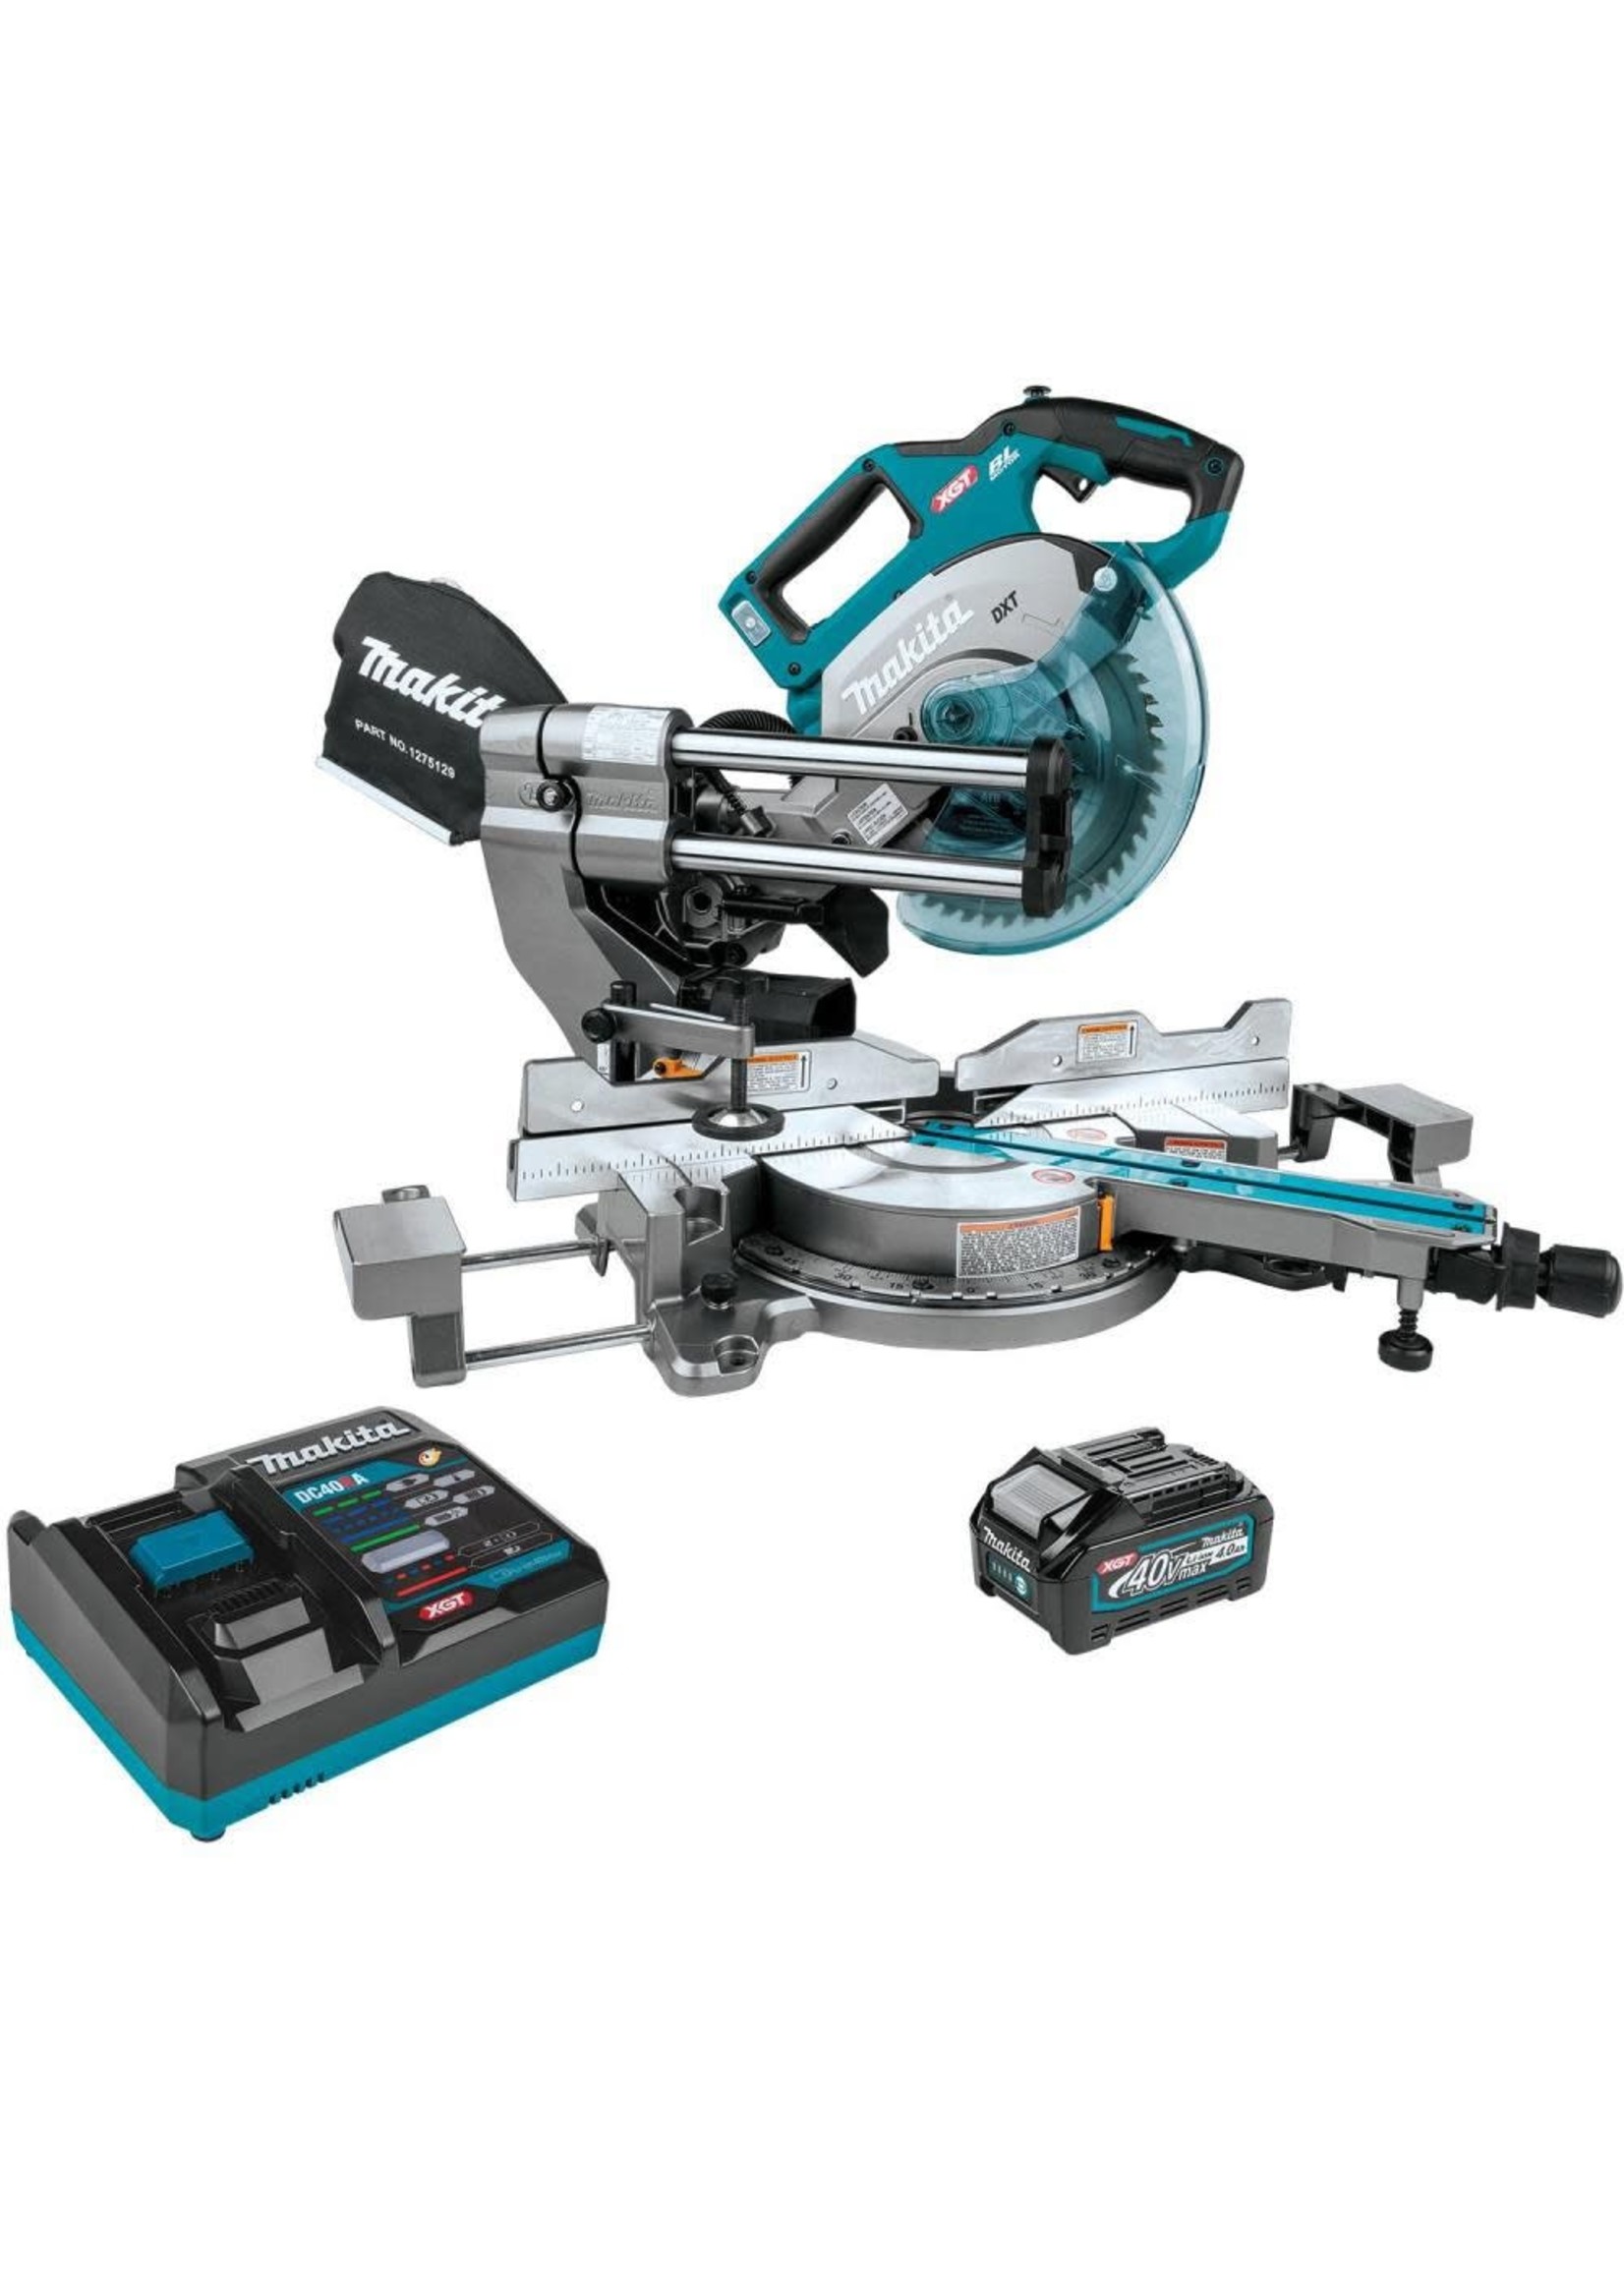 Makita GSL02M1 40V max XGT® Brushless Cordless 8-1/2" Dual-Bevel Sliding Compound Miter Saw Kit, AWS® Capable, with one battery (4.0Ah)